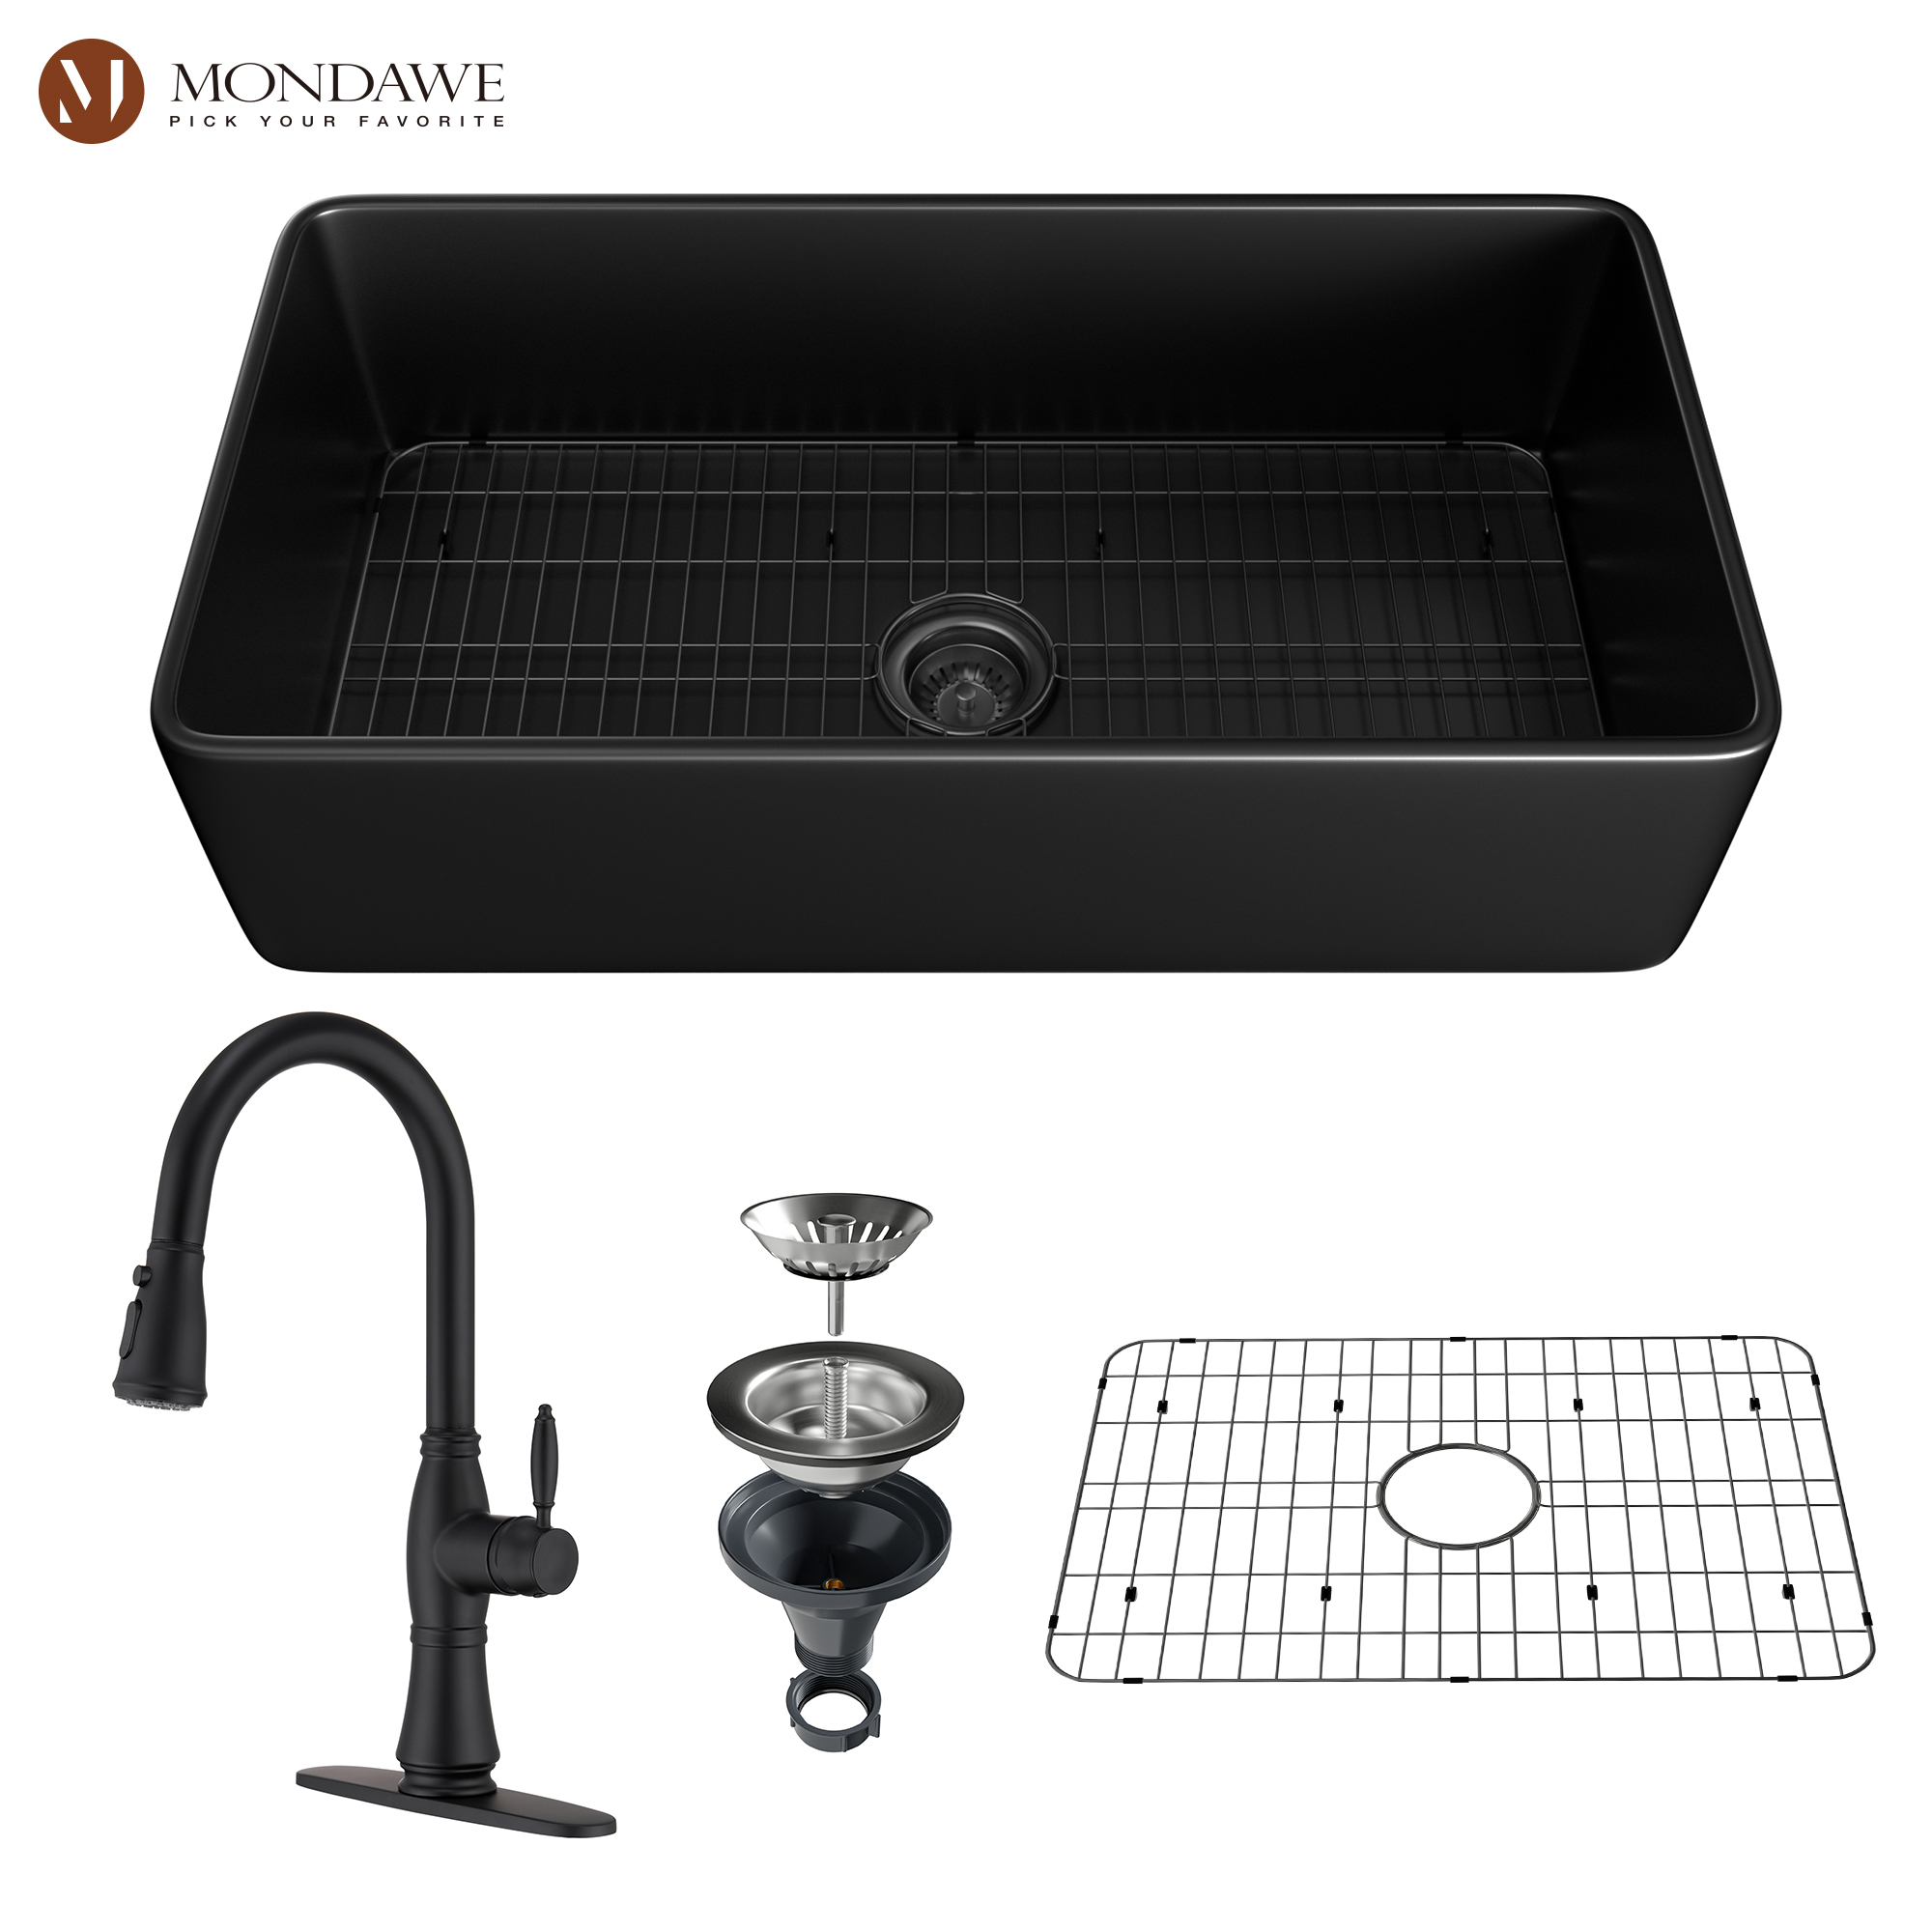 Farmhouse 36 In. Matte Black Single Bowl Fireclay Kitchen Sink Comes With Pull Down Kitchen Faucet-Mondawe